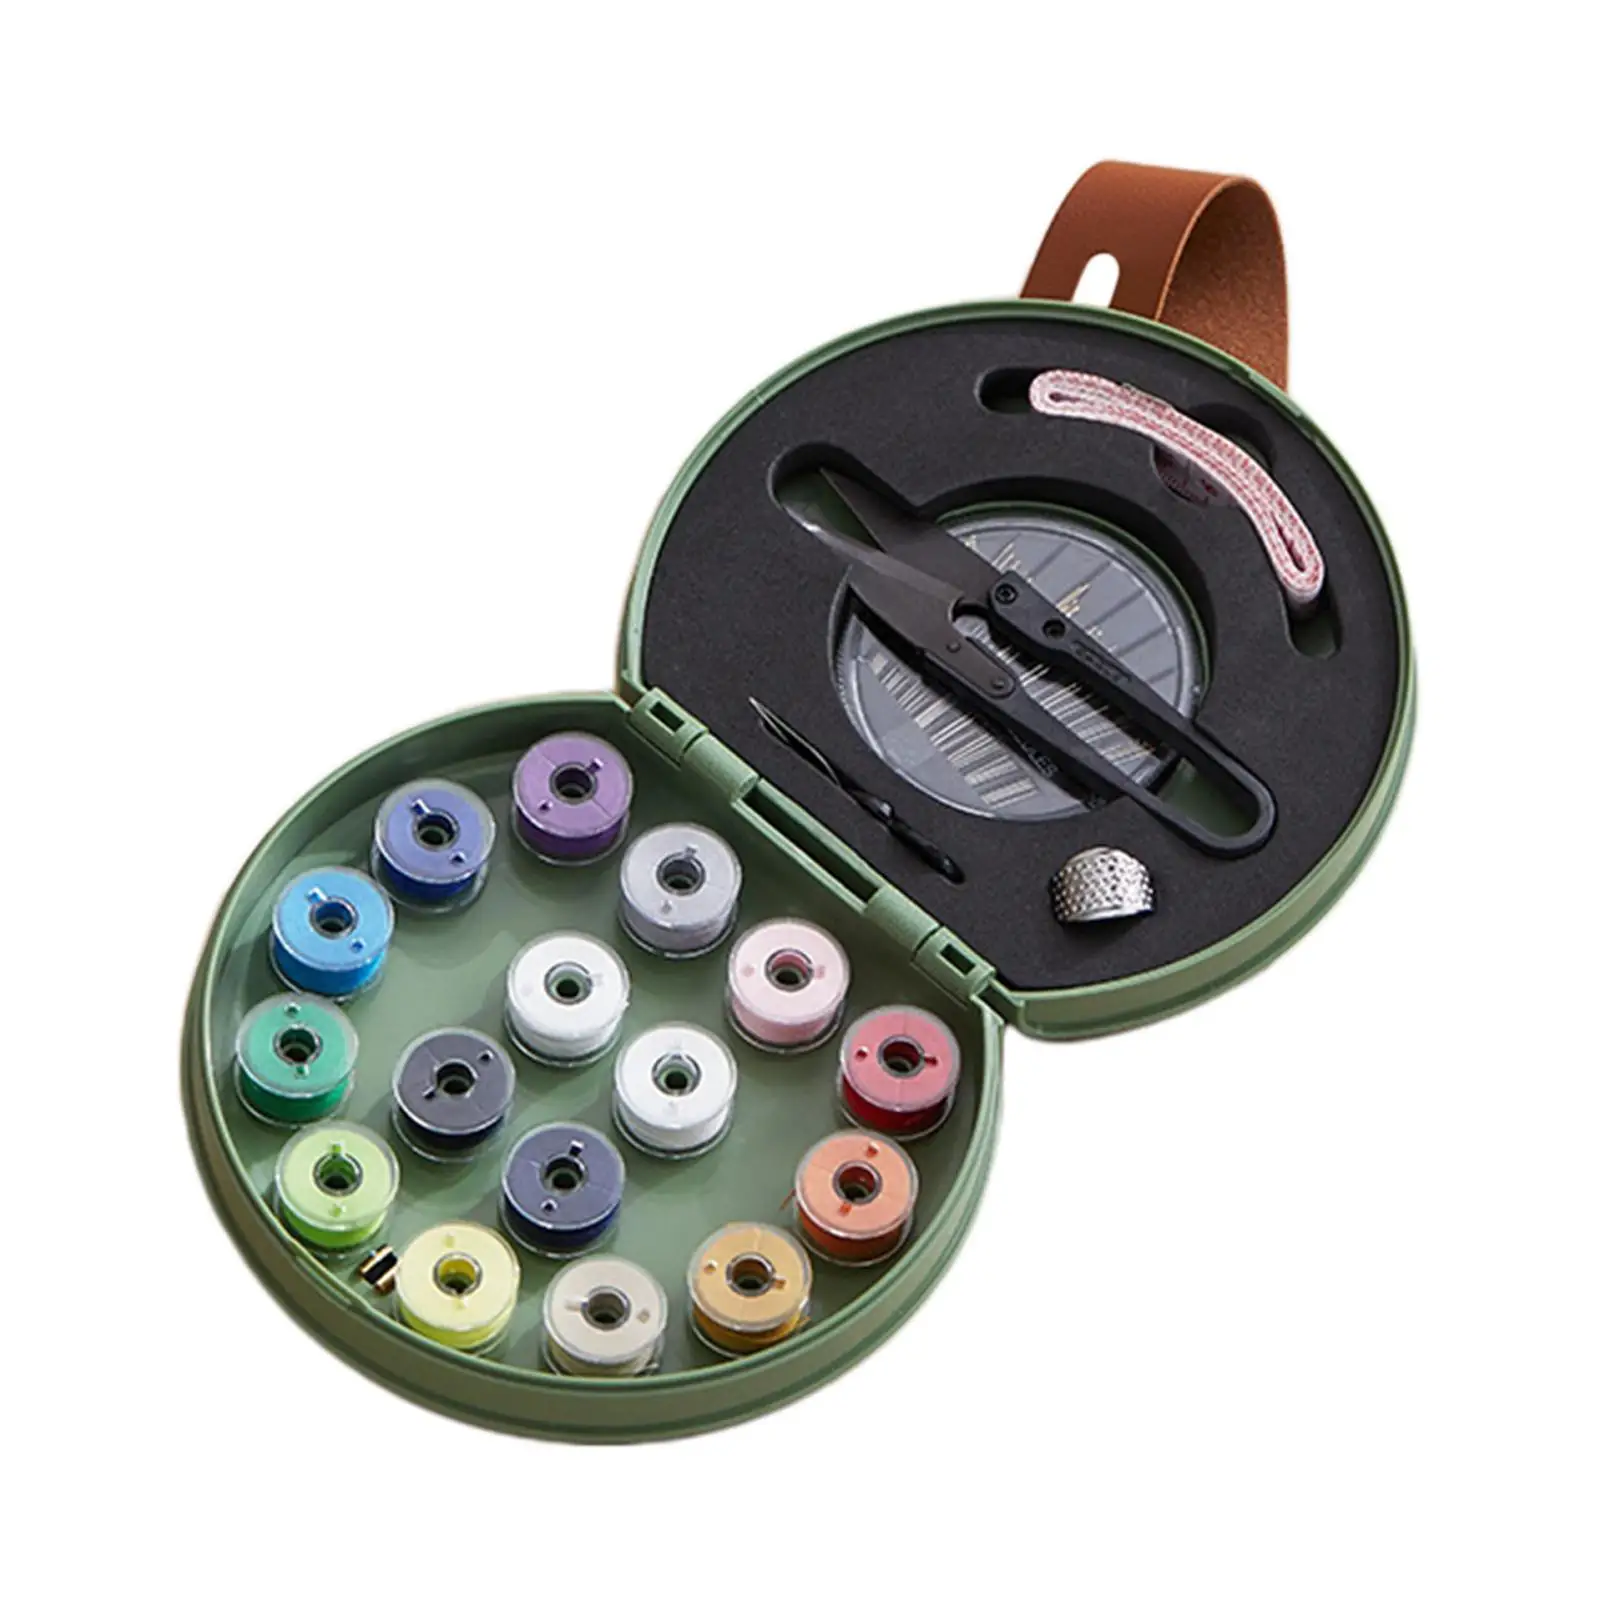 Sewing Kit Sewing Accessories Tape Measure Threader PU Leather Case Basic Sewing Repair Kits for Travel Adults Kids